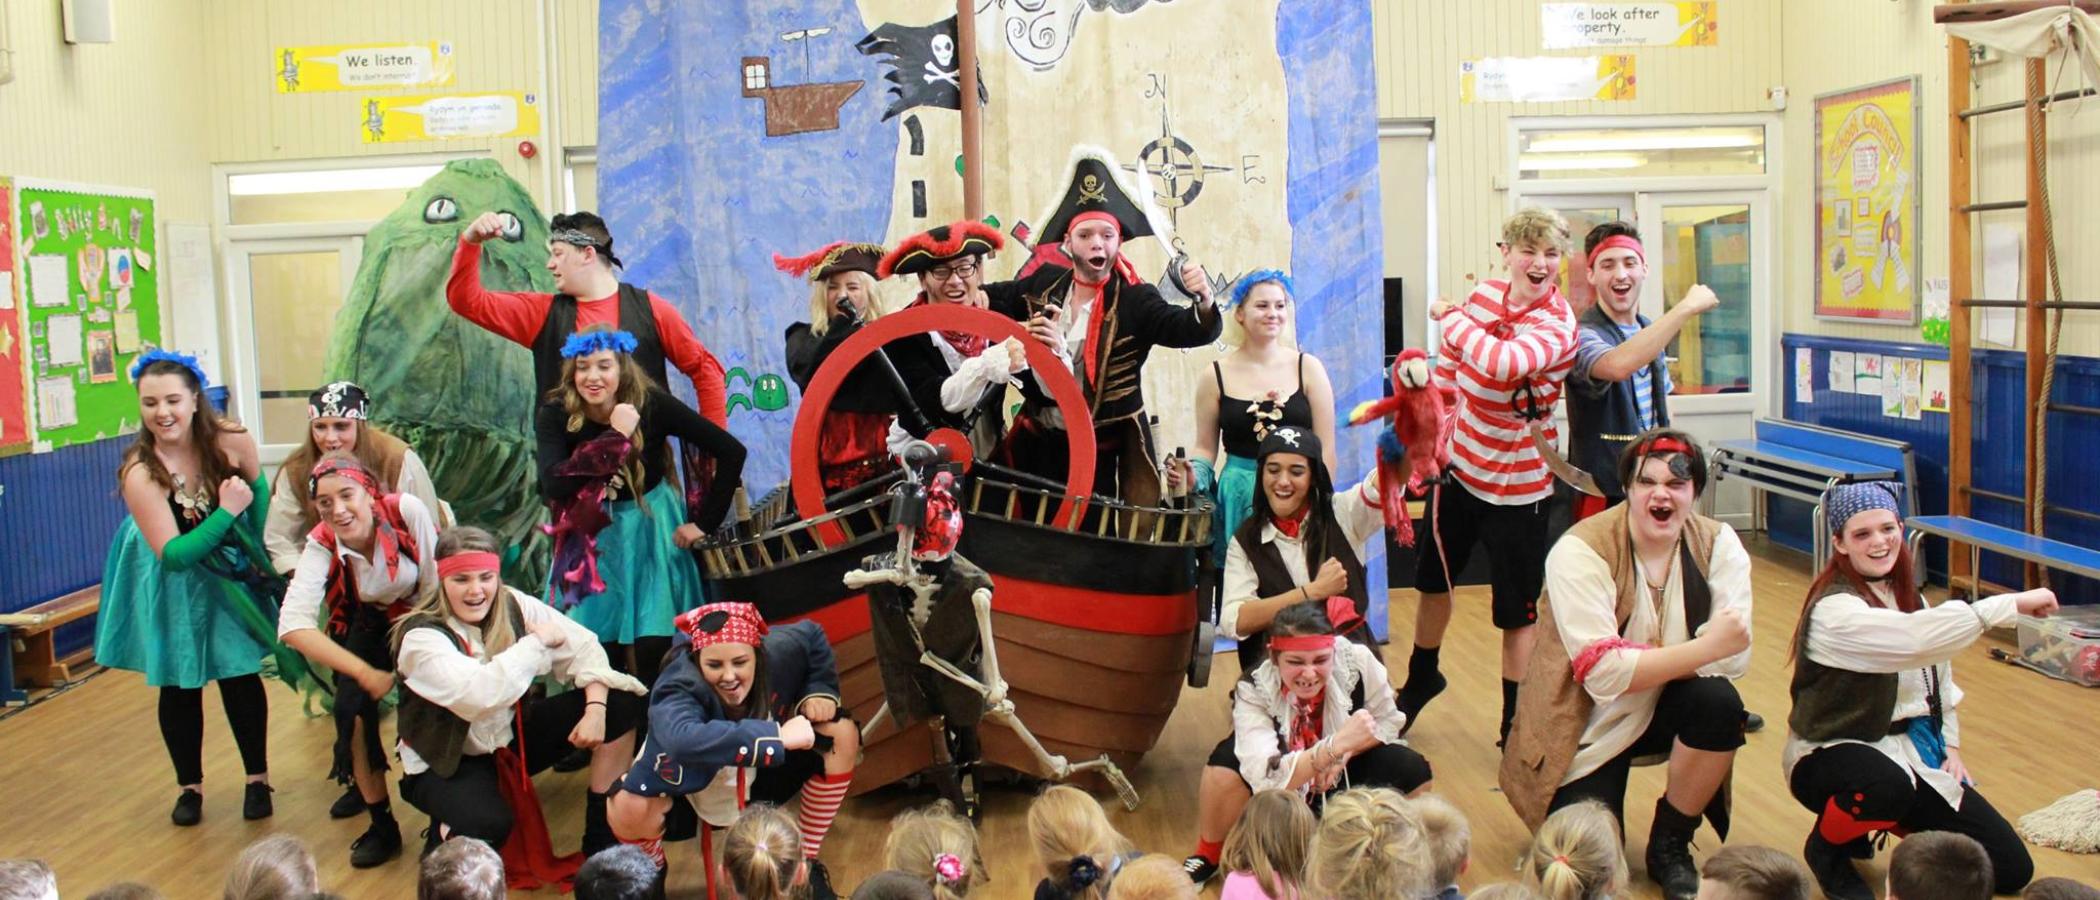 'Revolting Pirates' at the National Waterfront Museum - 1 April